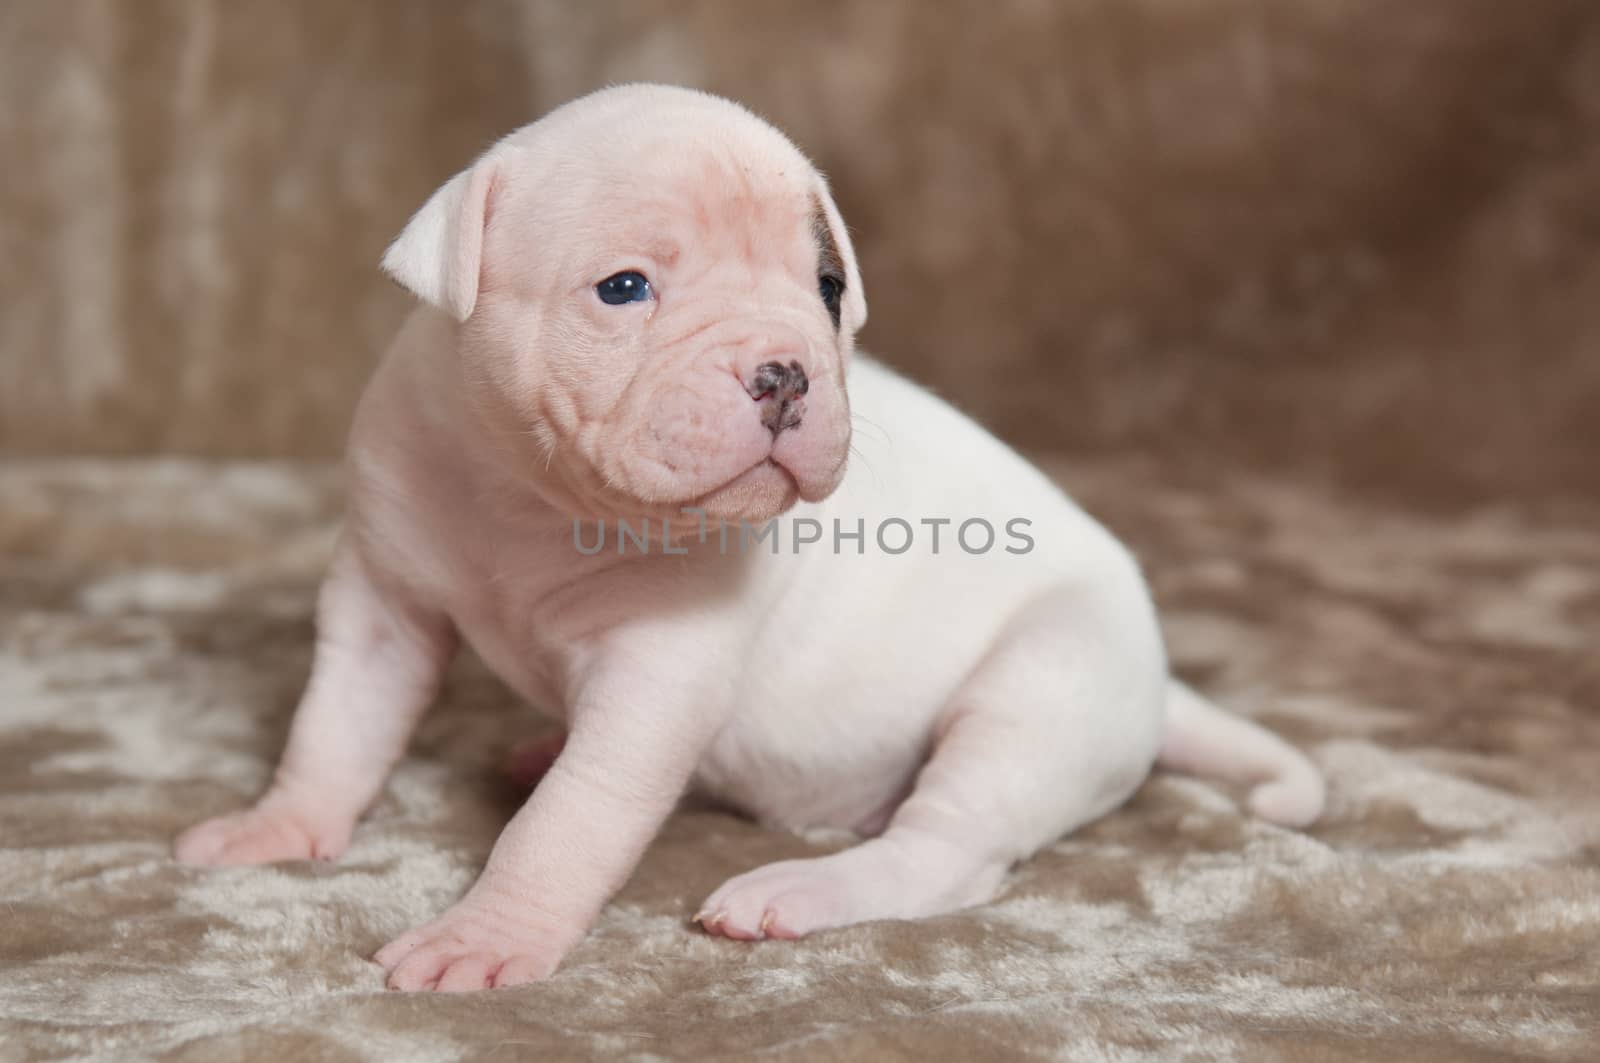 Funny small American Bulldog puppy on light background